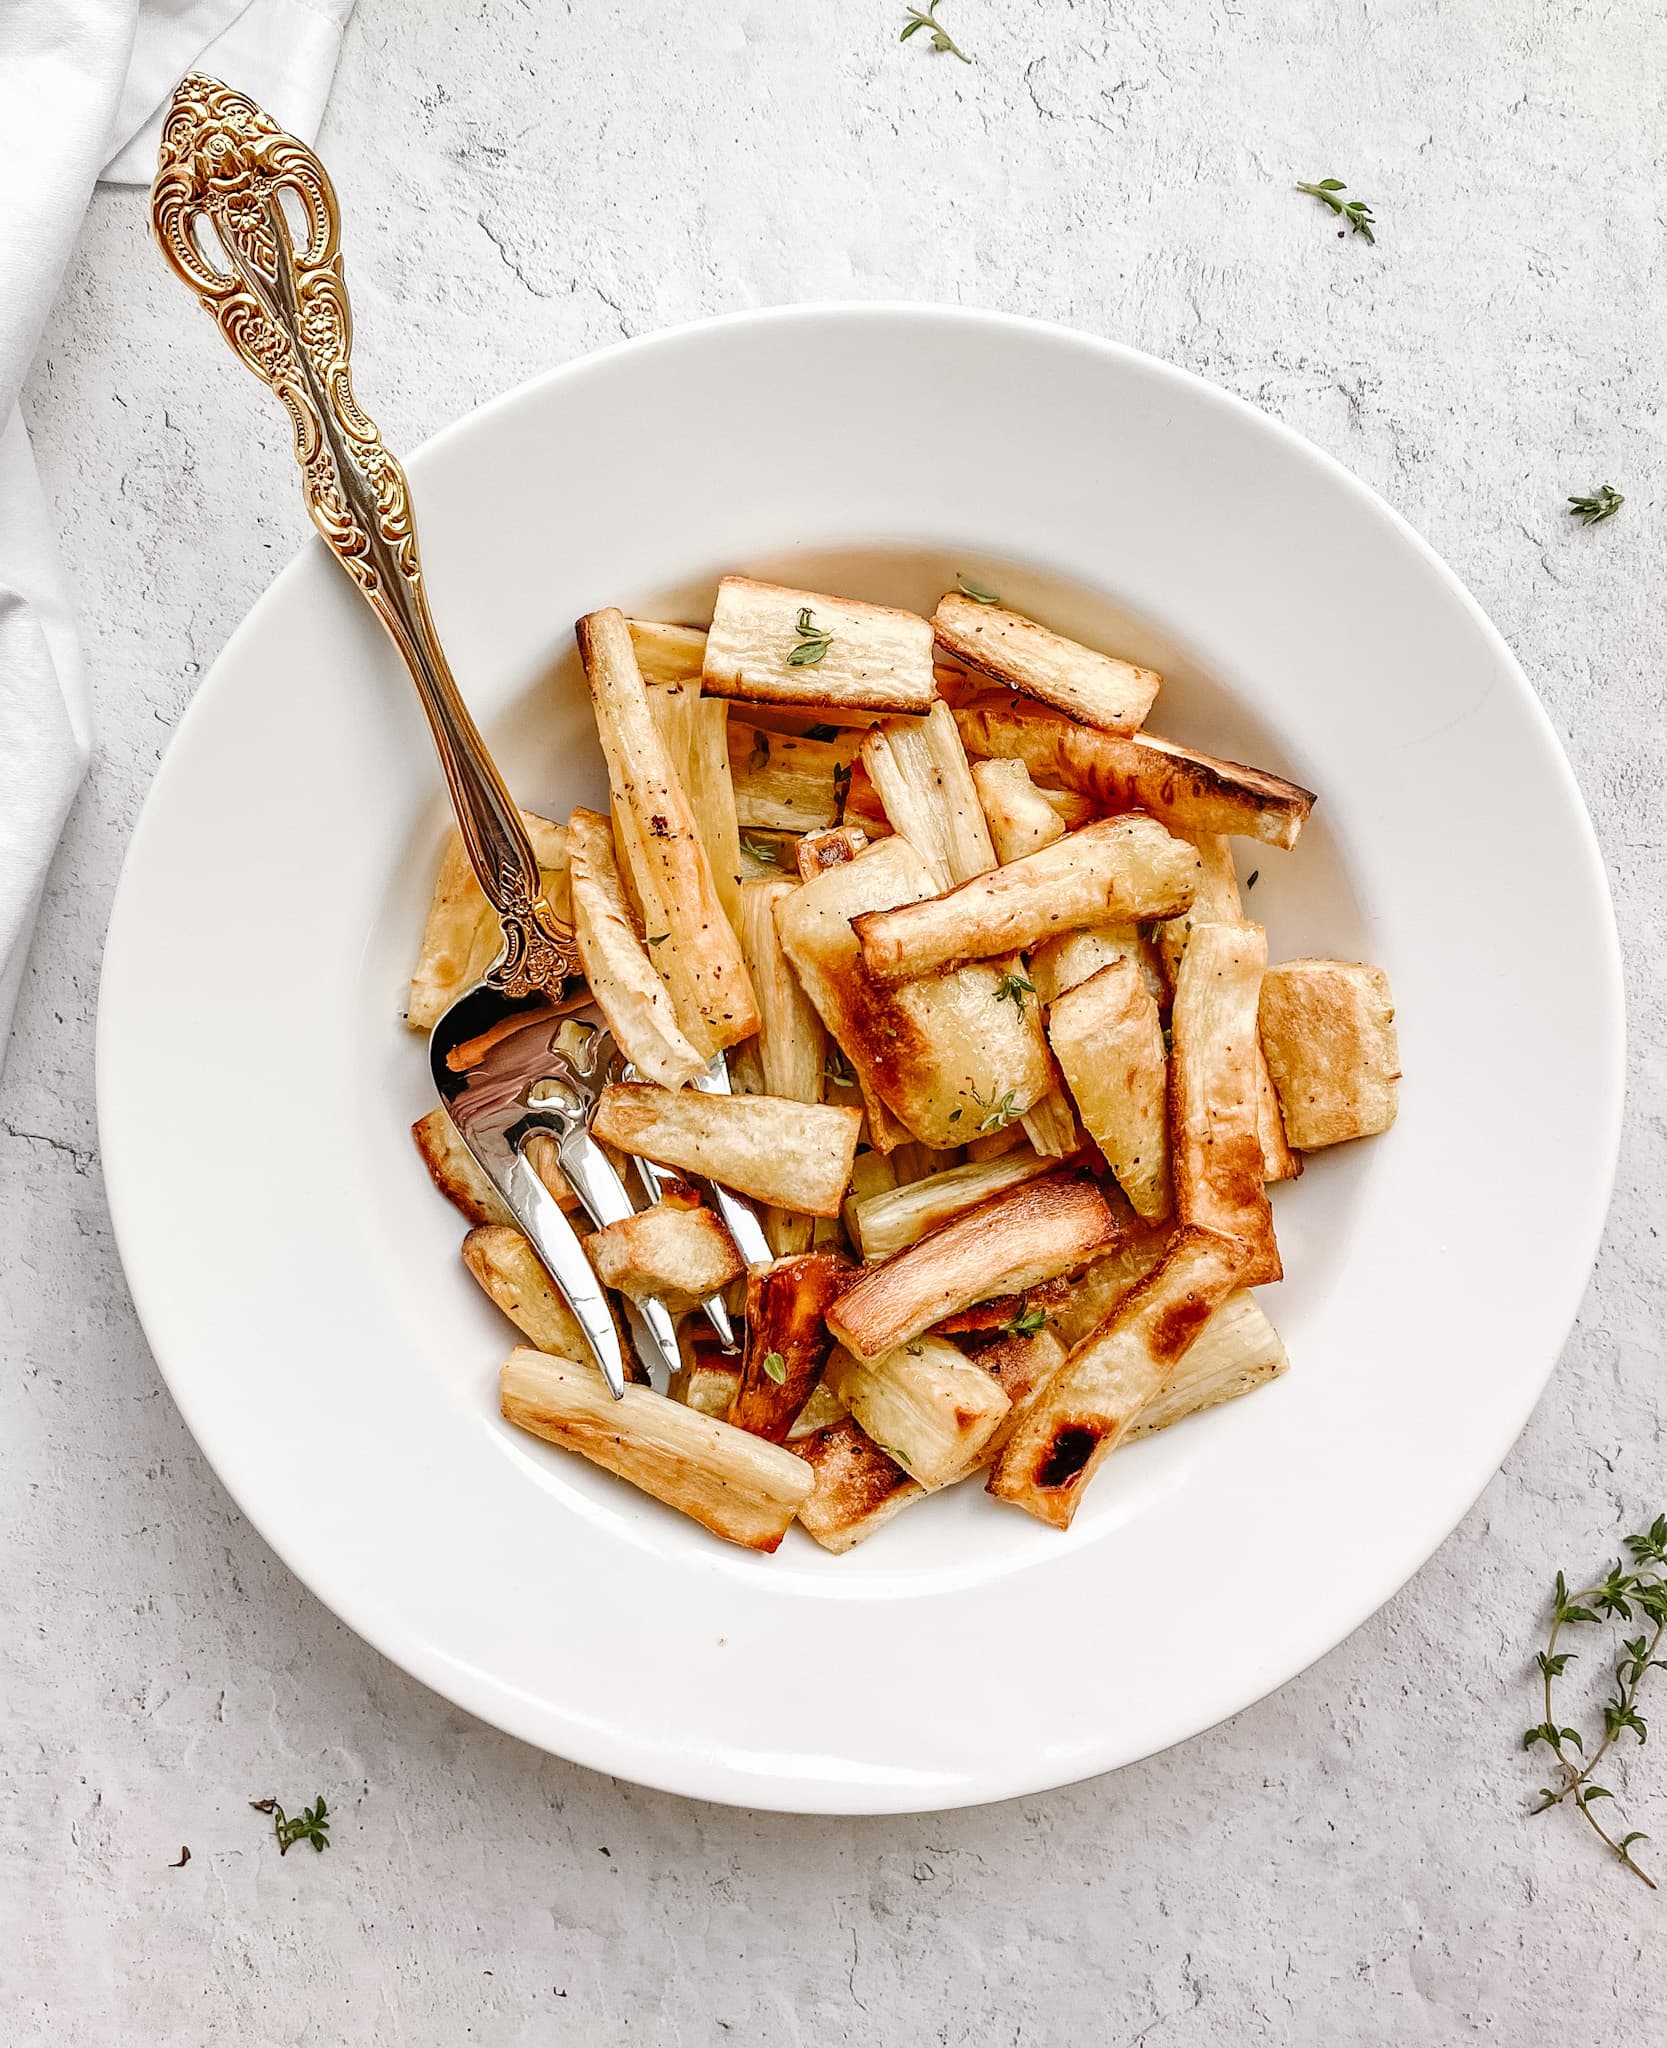 roasted parsnips in a while bowl with a gold serving fork